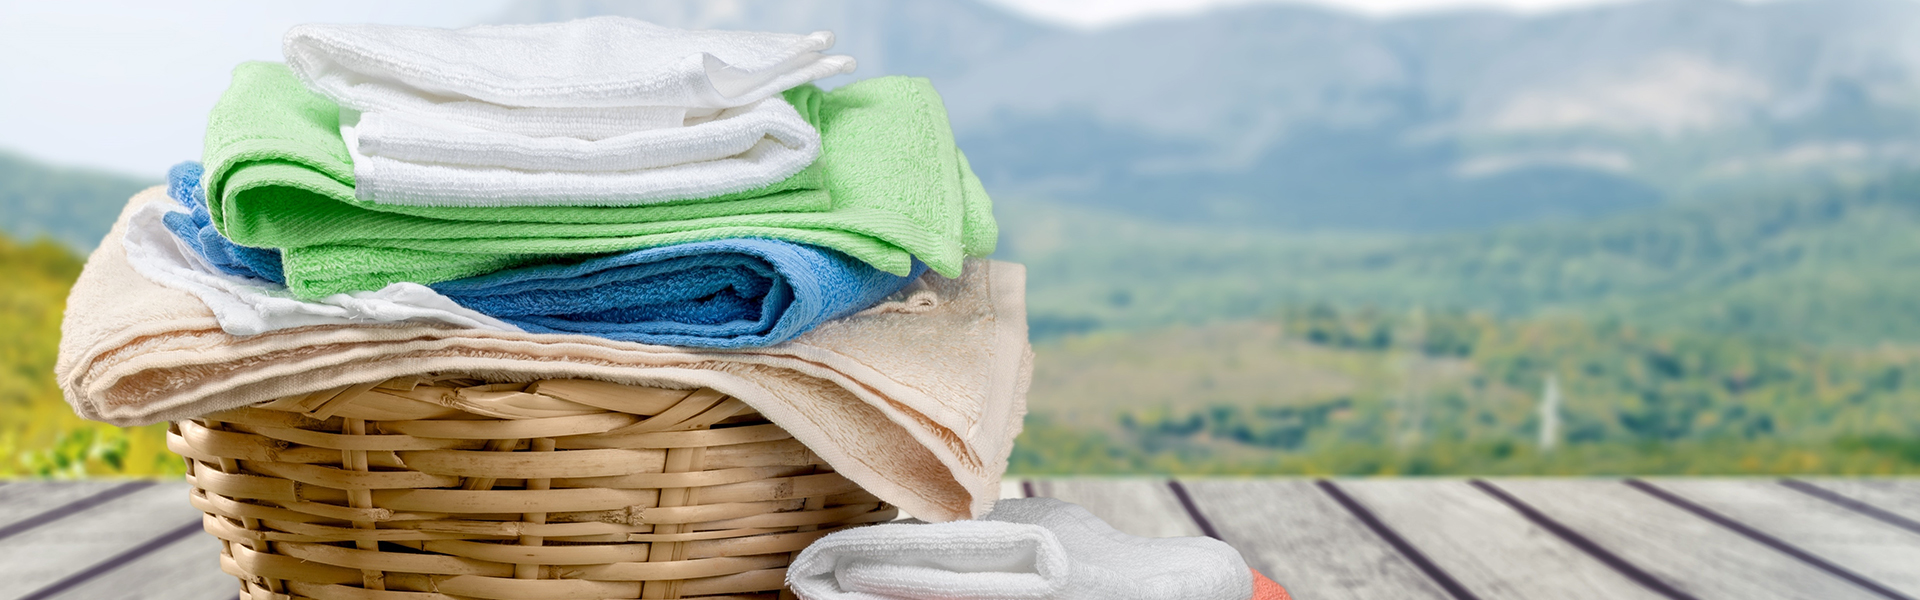 Wash/Fold Services | Newberg coin laundry - laundry services since 2005